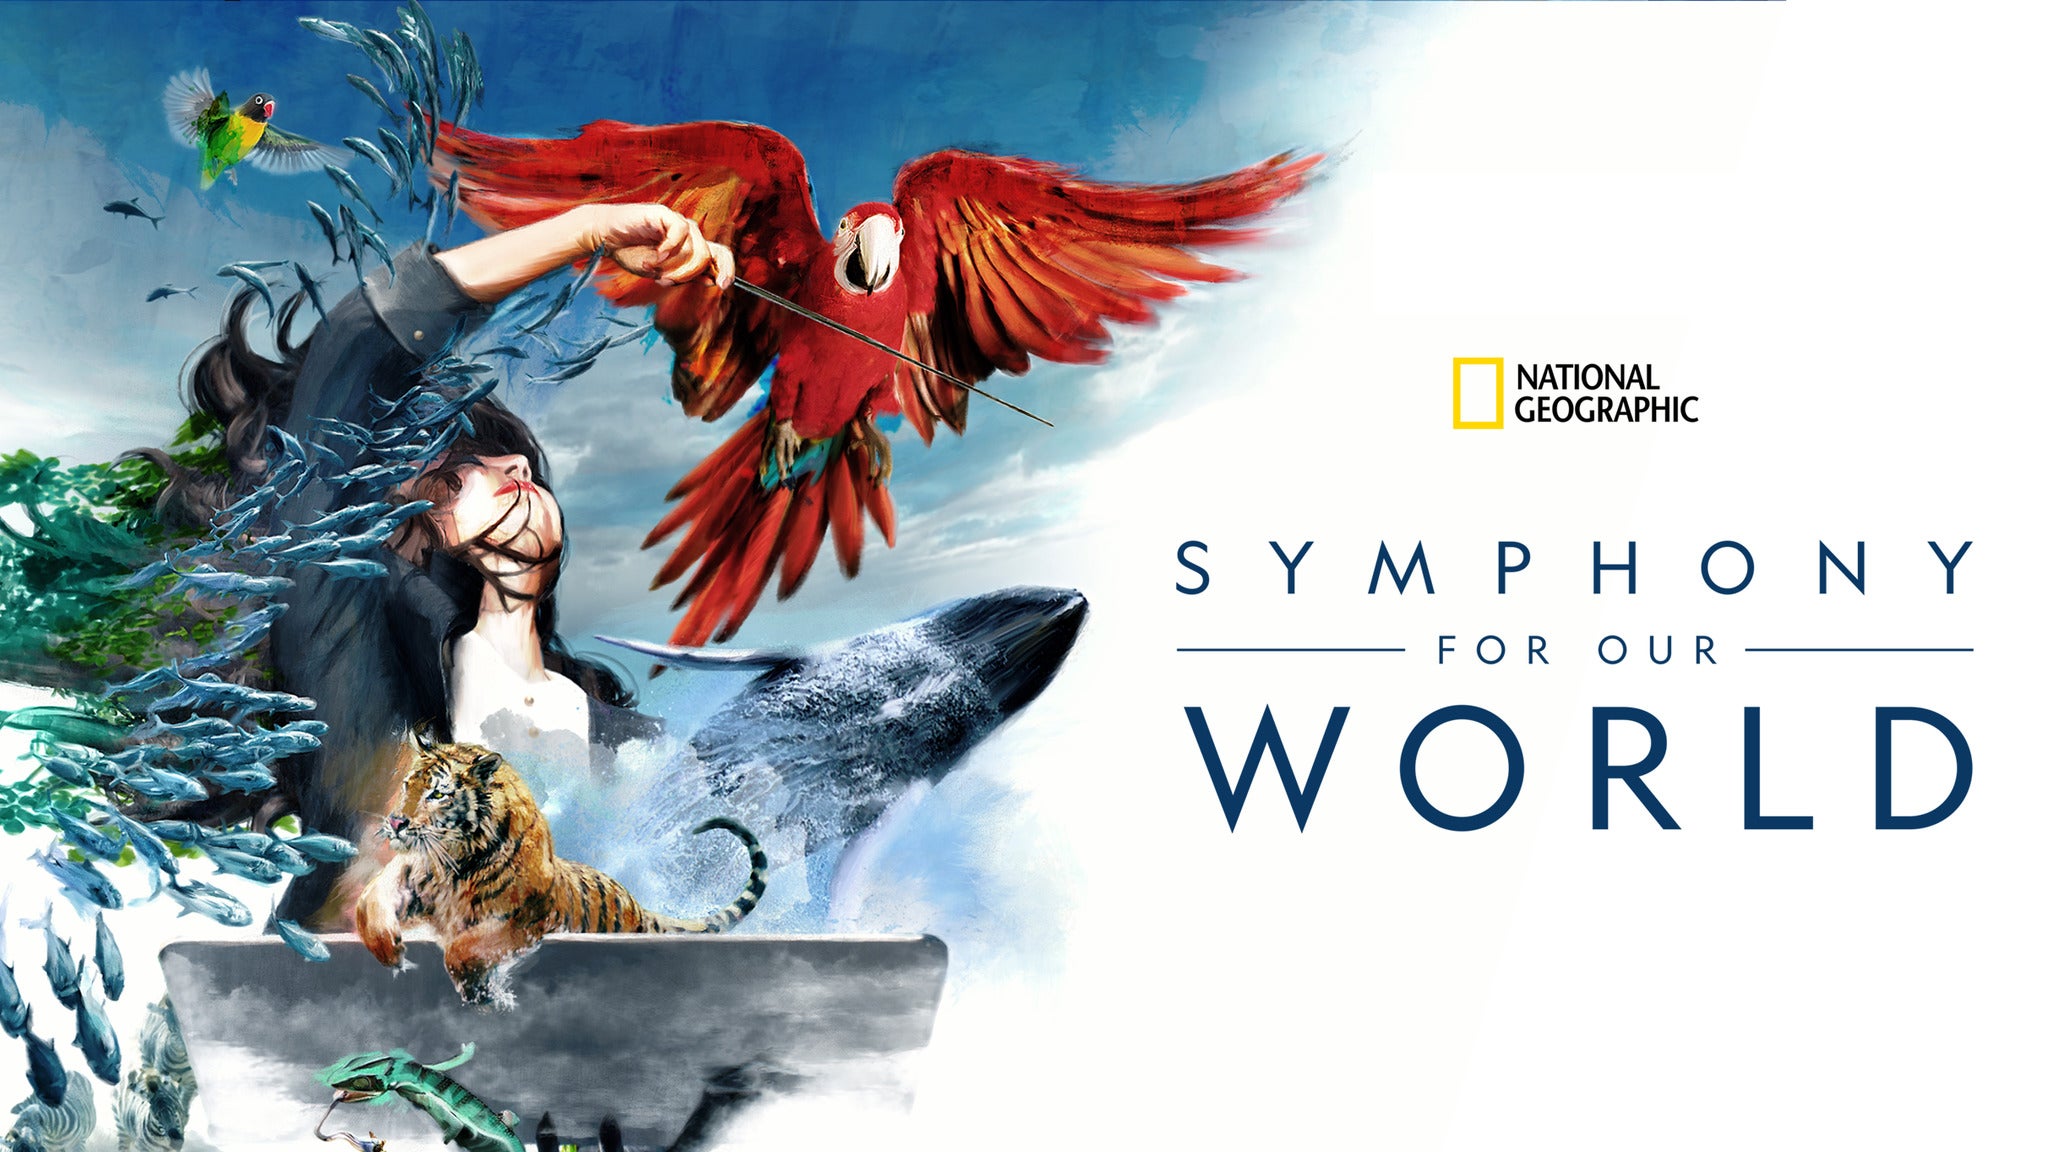 National Geographic: Symphony For Our World in Columbus promo photo for Exclusive presale offer code